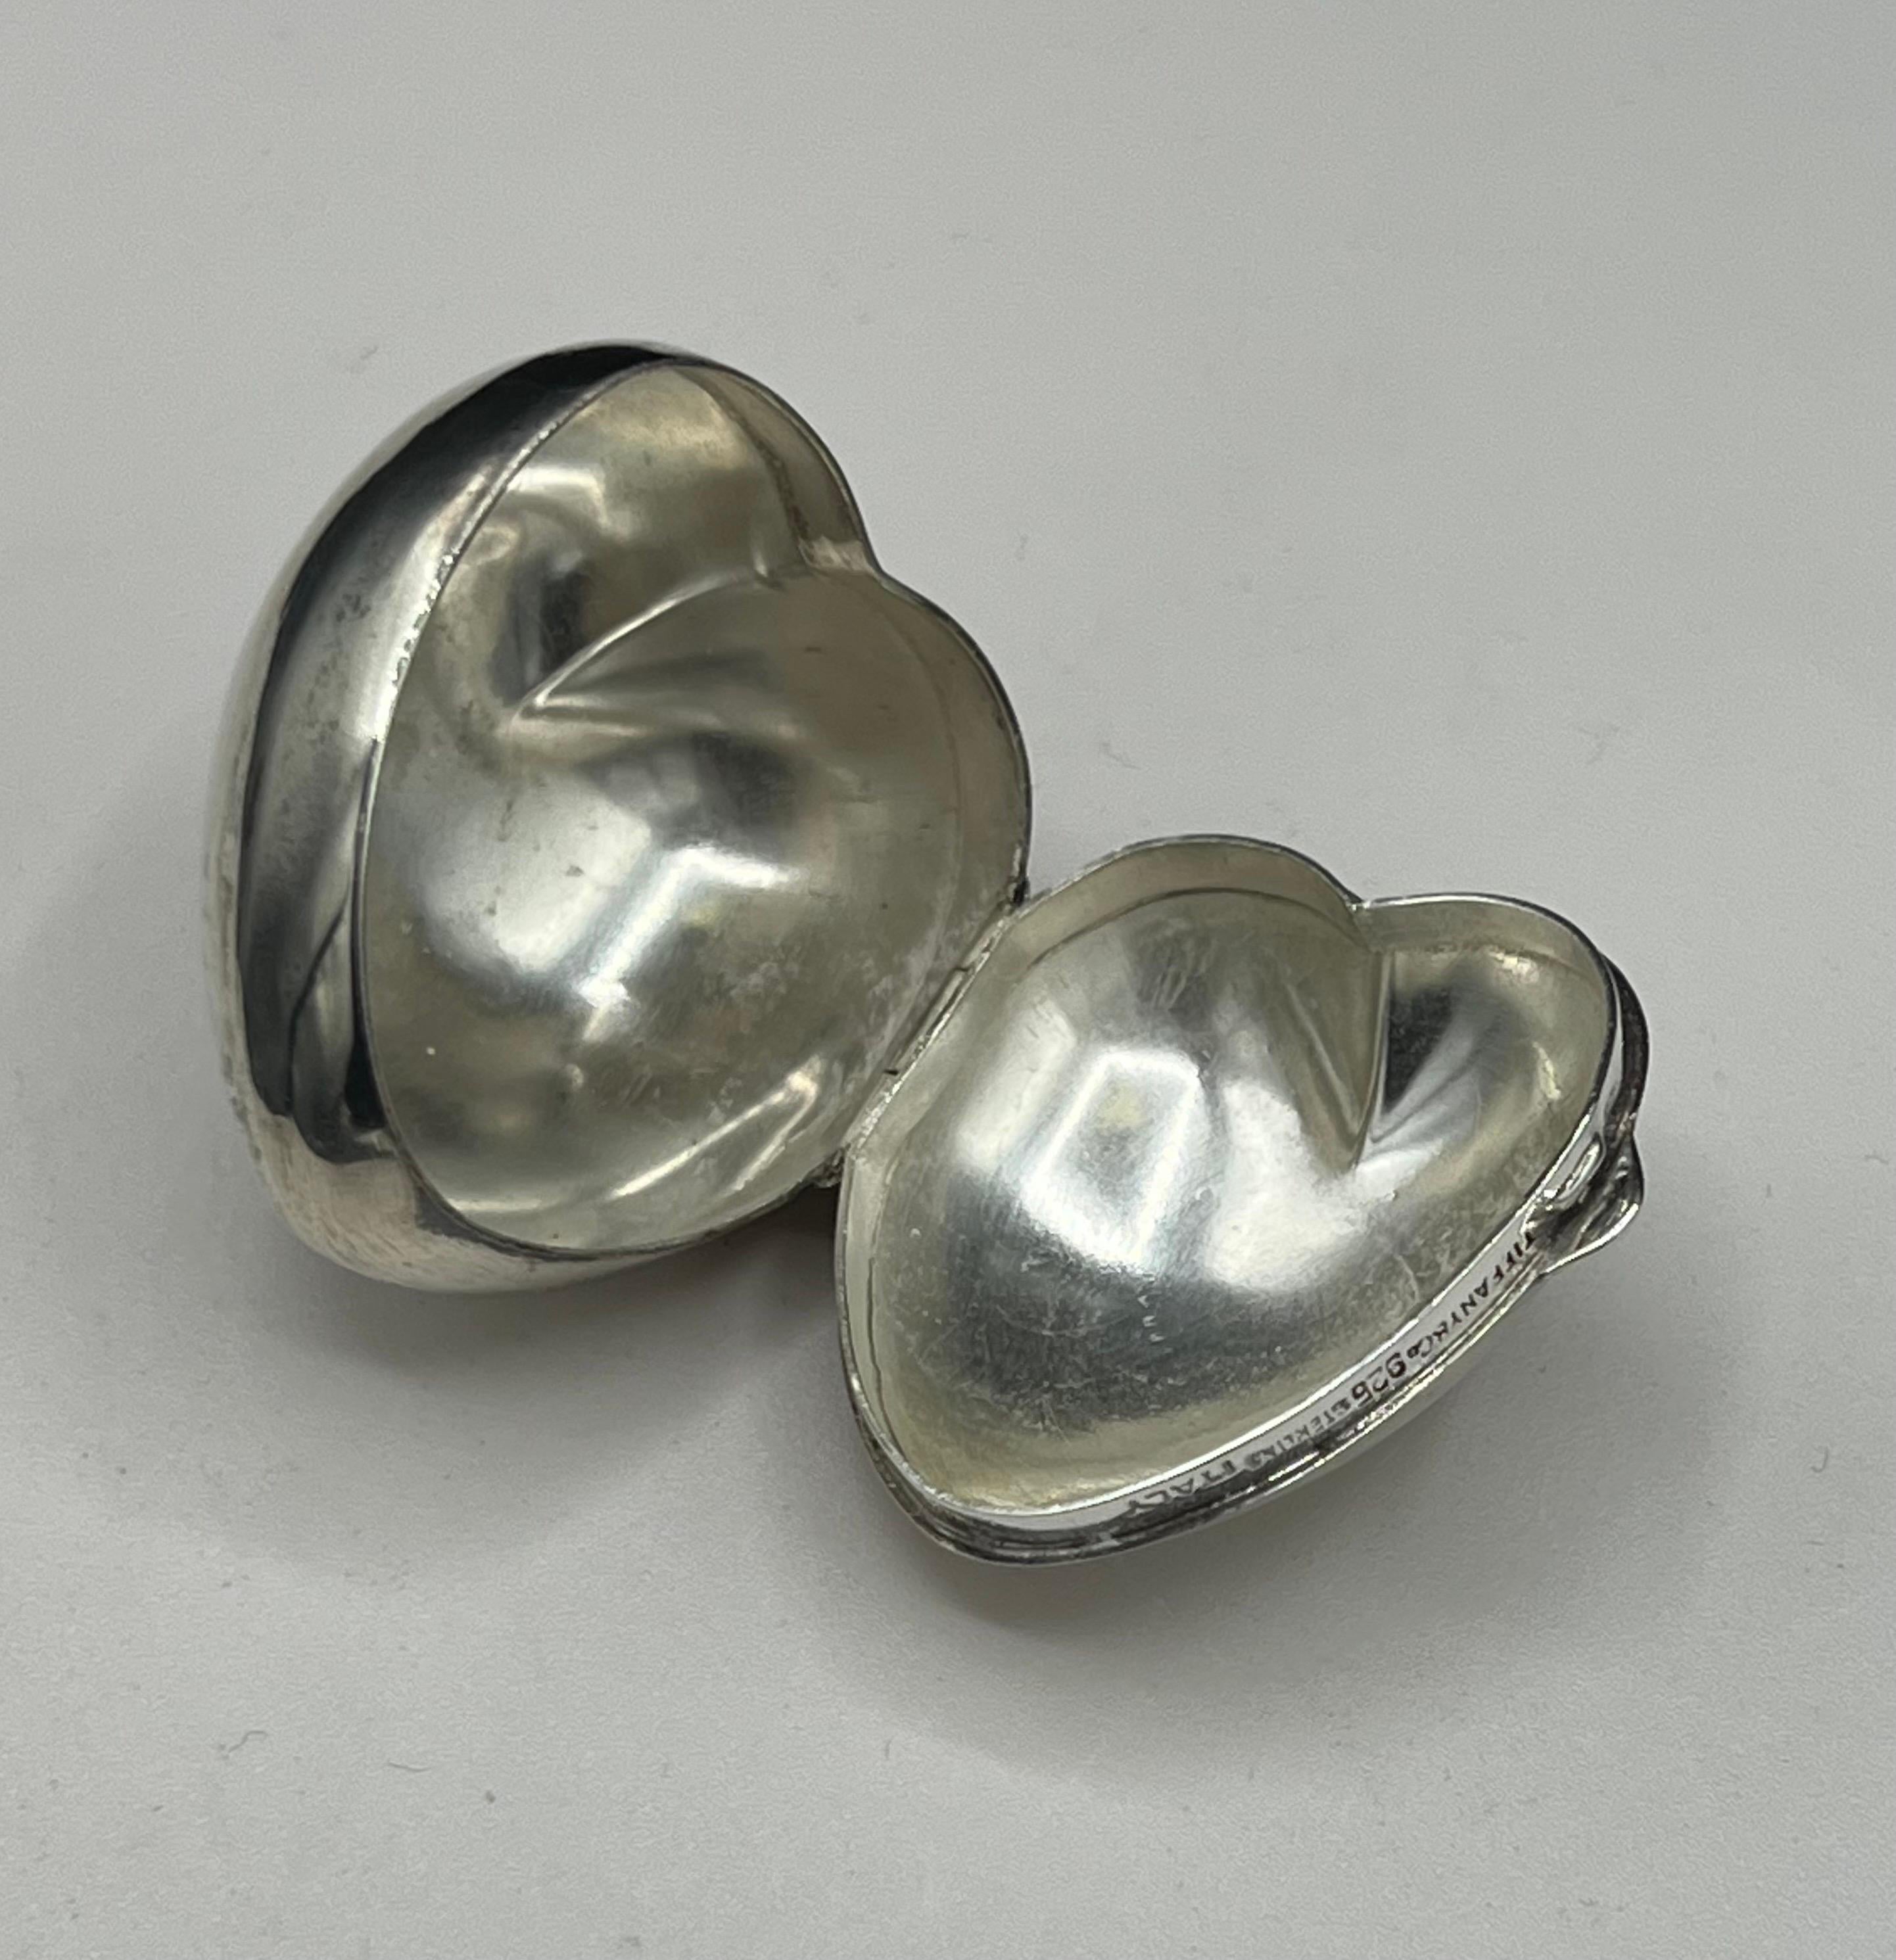 This elegant “ Puffed Heart “ Pill Box by Tiffany & Co.   The legendary Tiffany brand was founded in 1837 by Charles Lewis Tiffany and John B. Young in Connecticut as a 